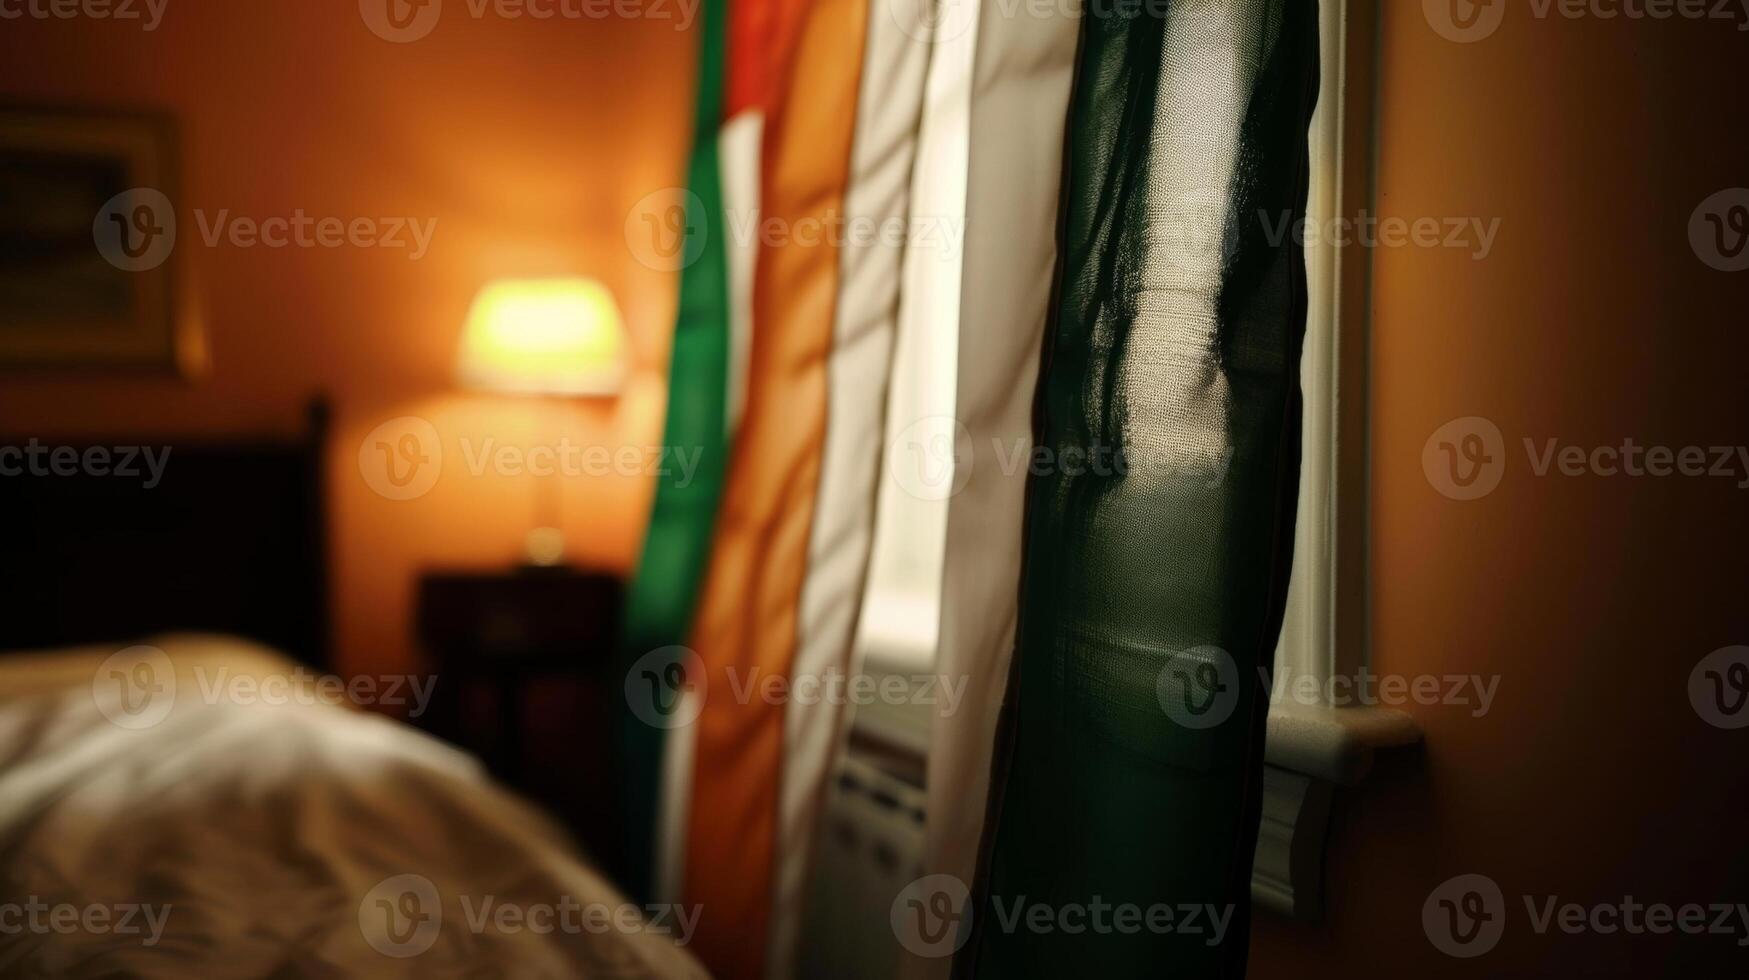 An Irish flag hanging in the corner of the room representing the pride and love for Irish culture during this sober St. Patricks Day celebration photo